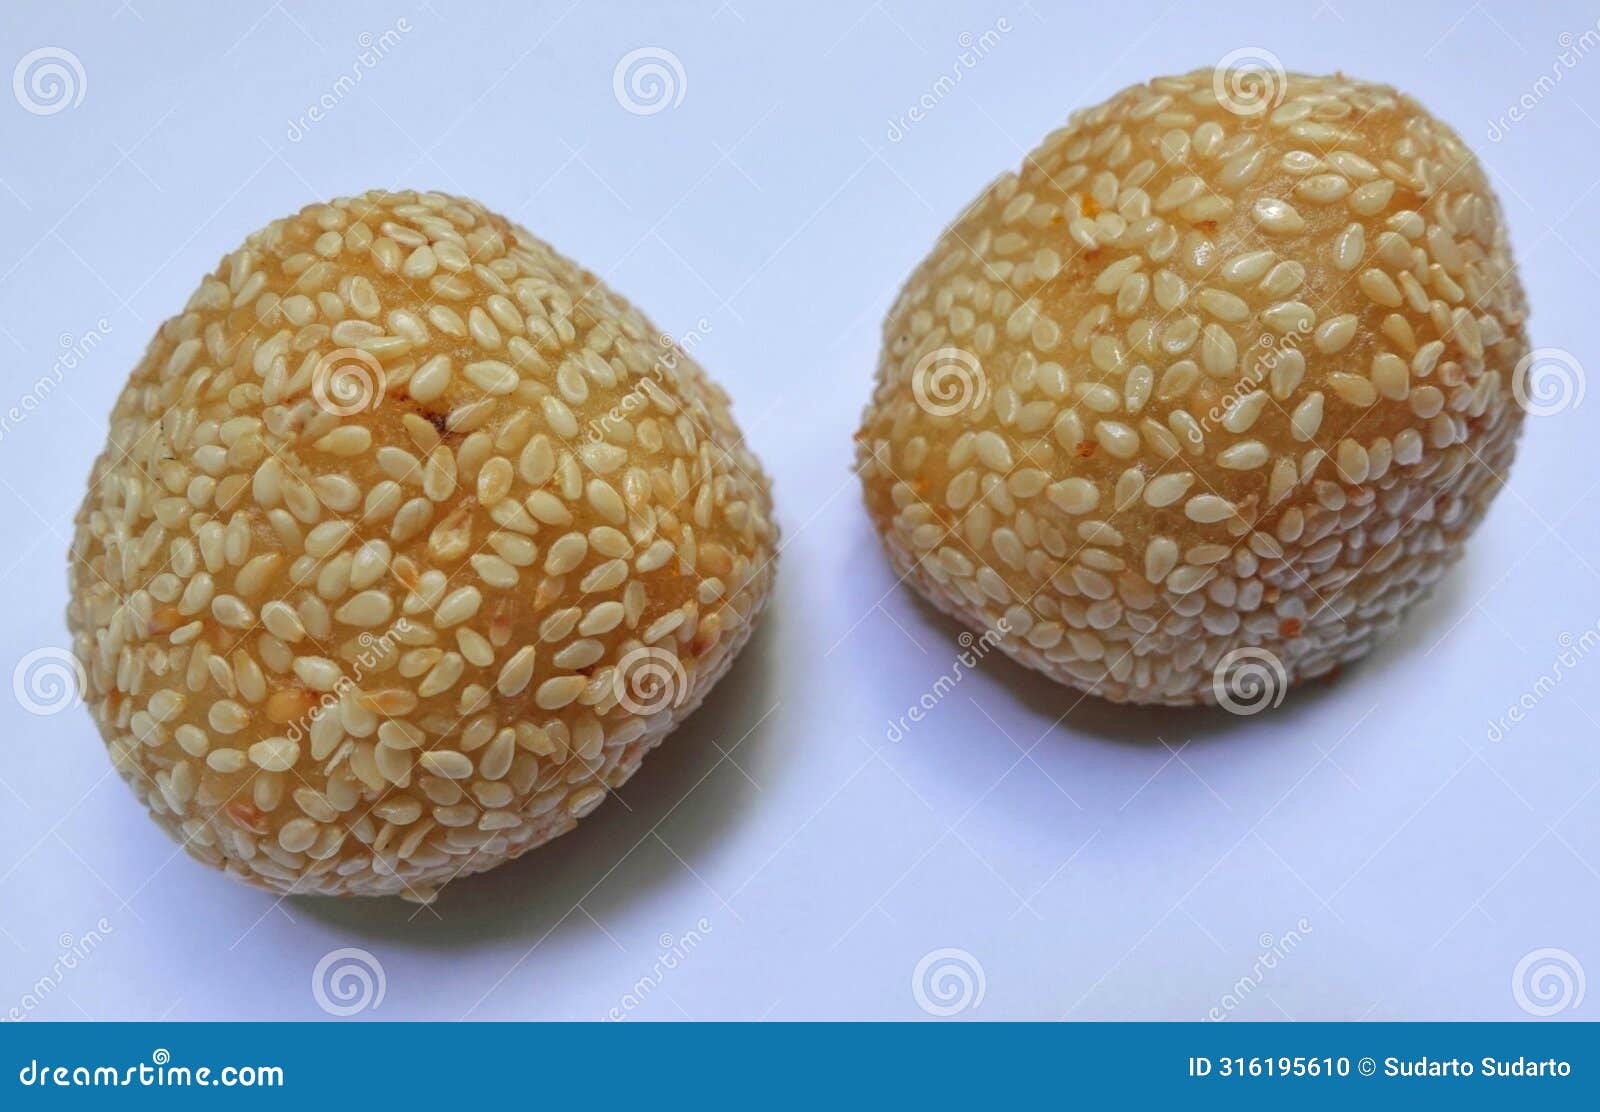 traditional indonesian cake is called onde onde.